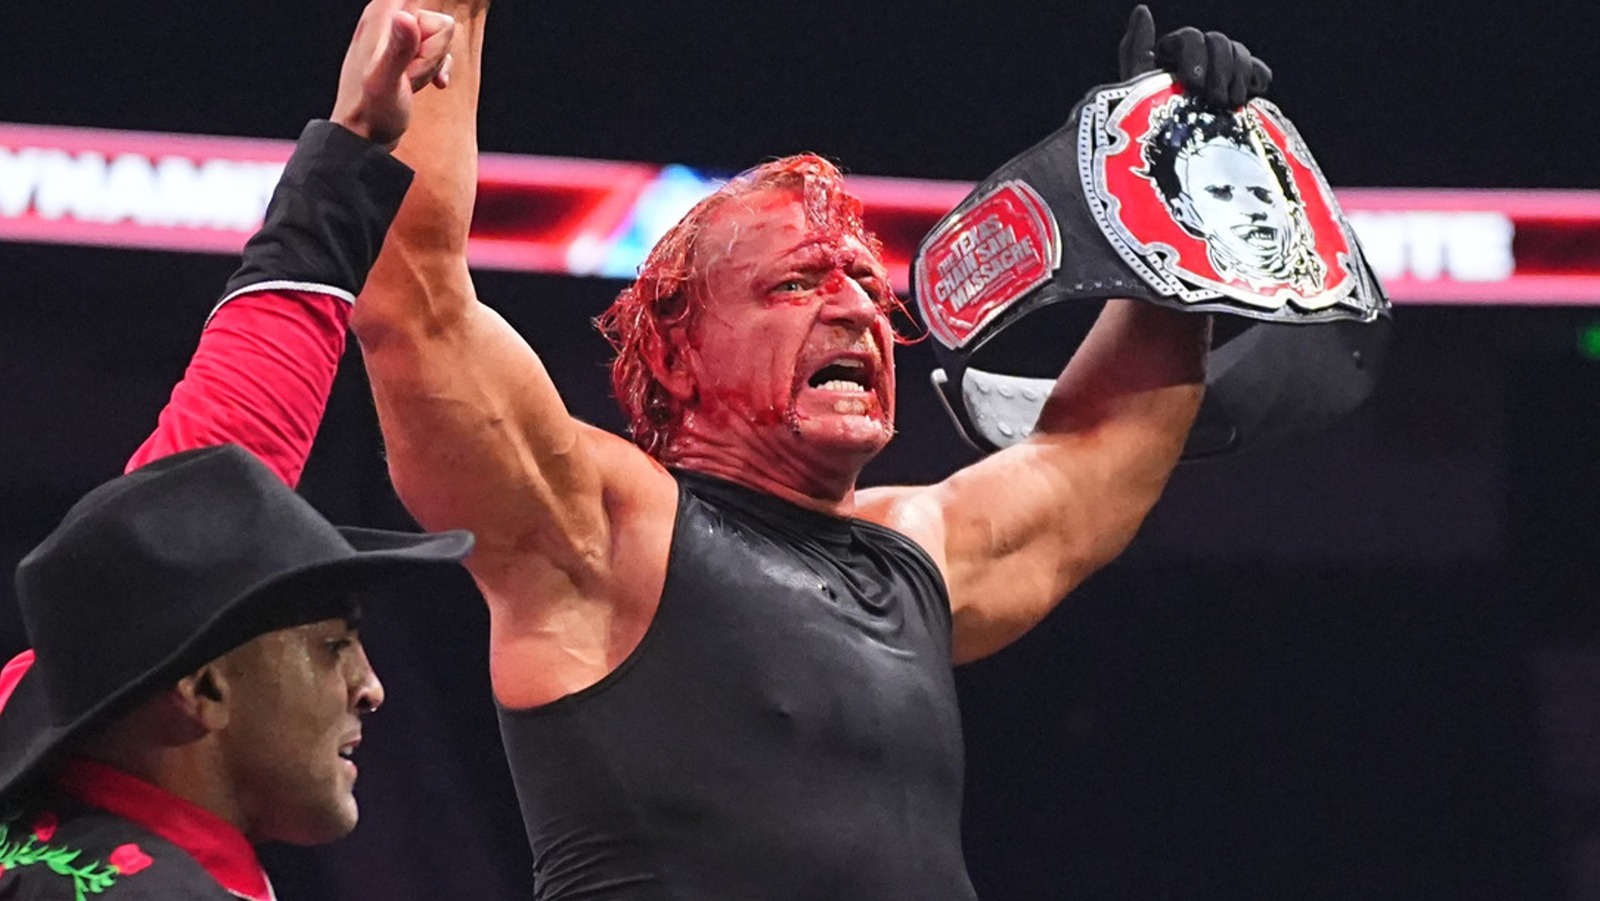 WBD Reportedly Pleased With AEW's Texas Chainsaw Massacre Cross Promotional Match